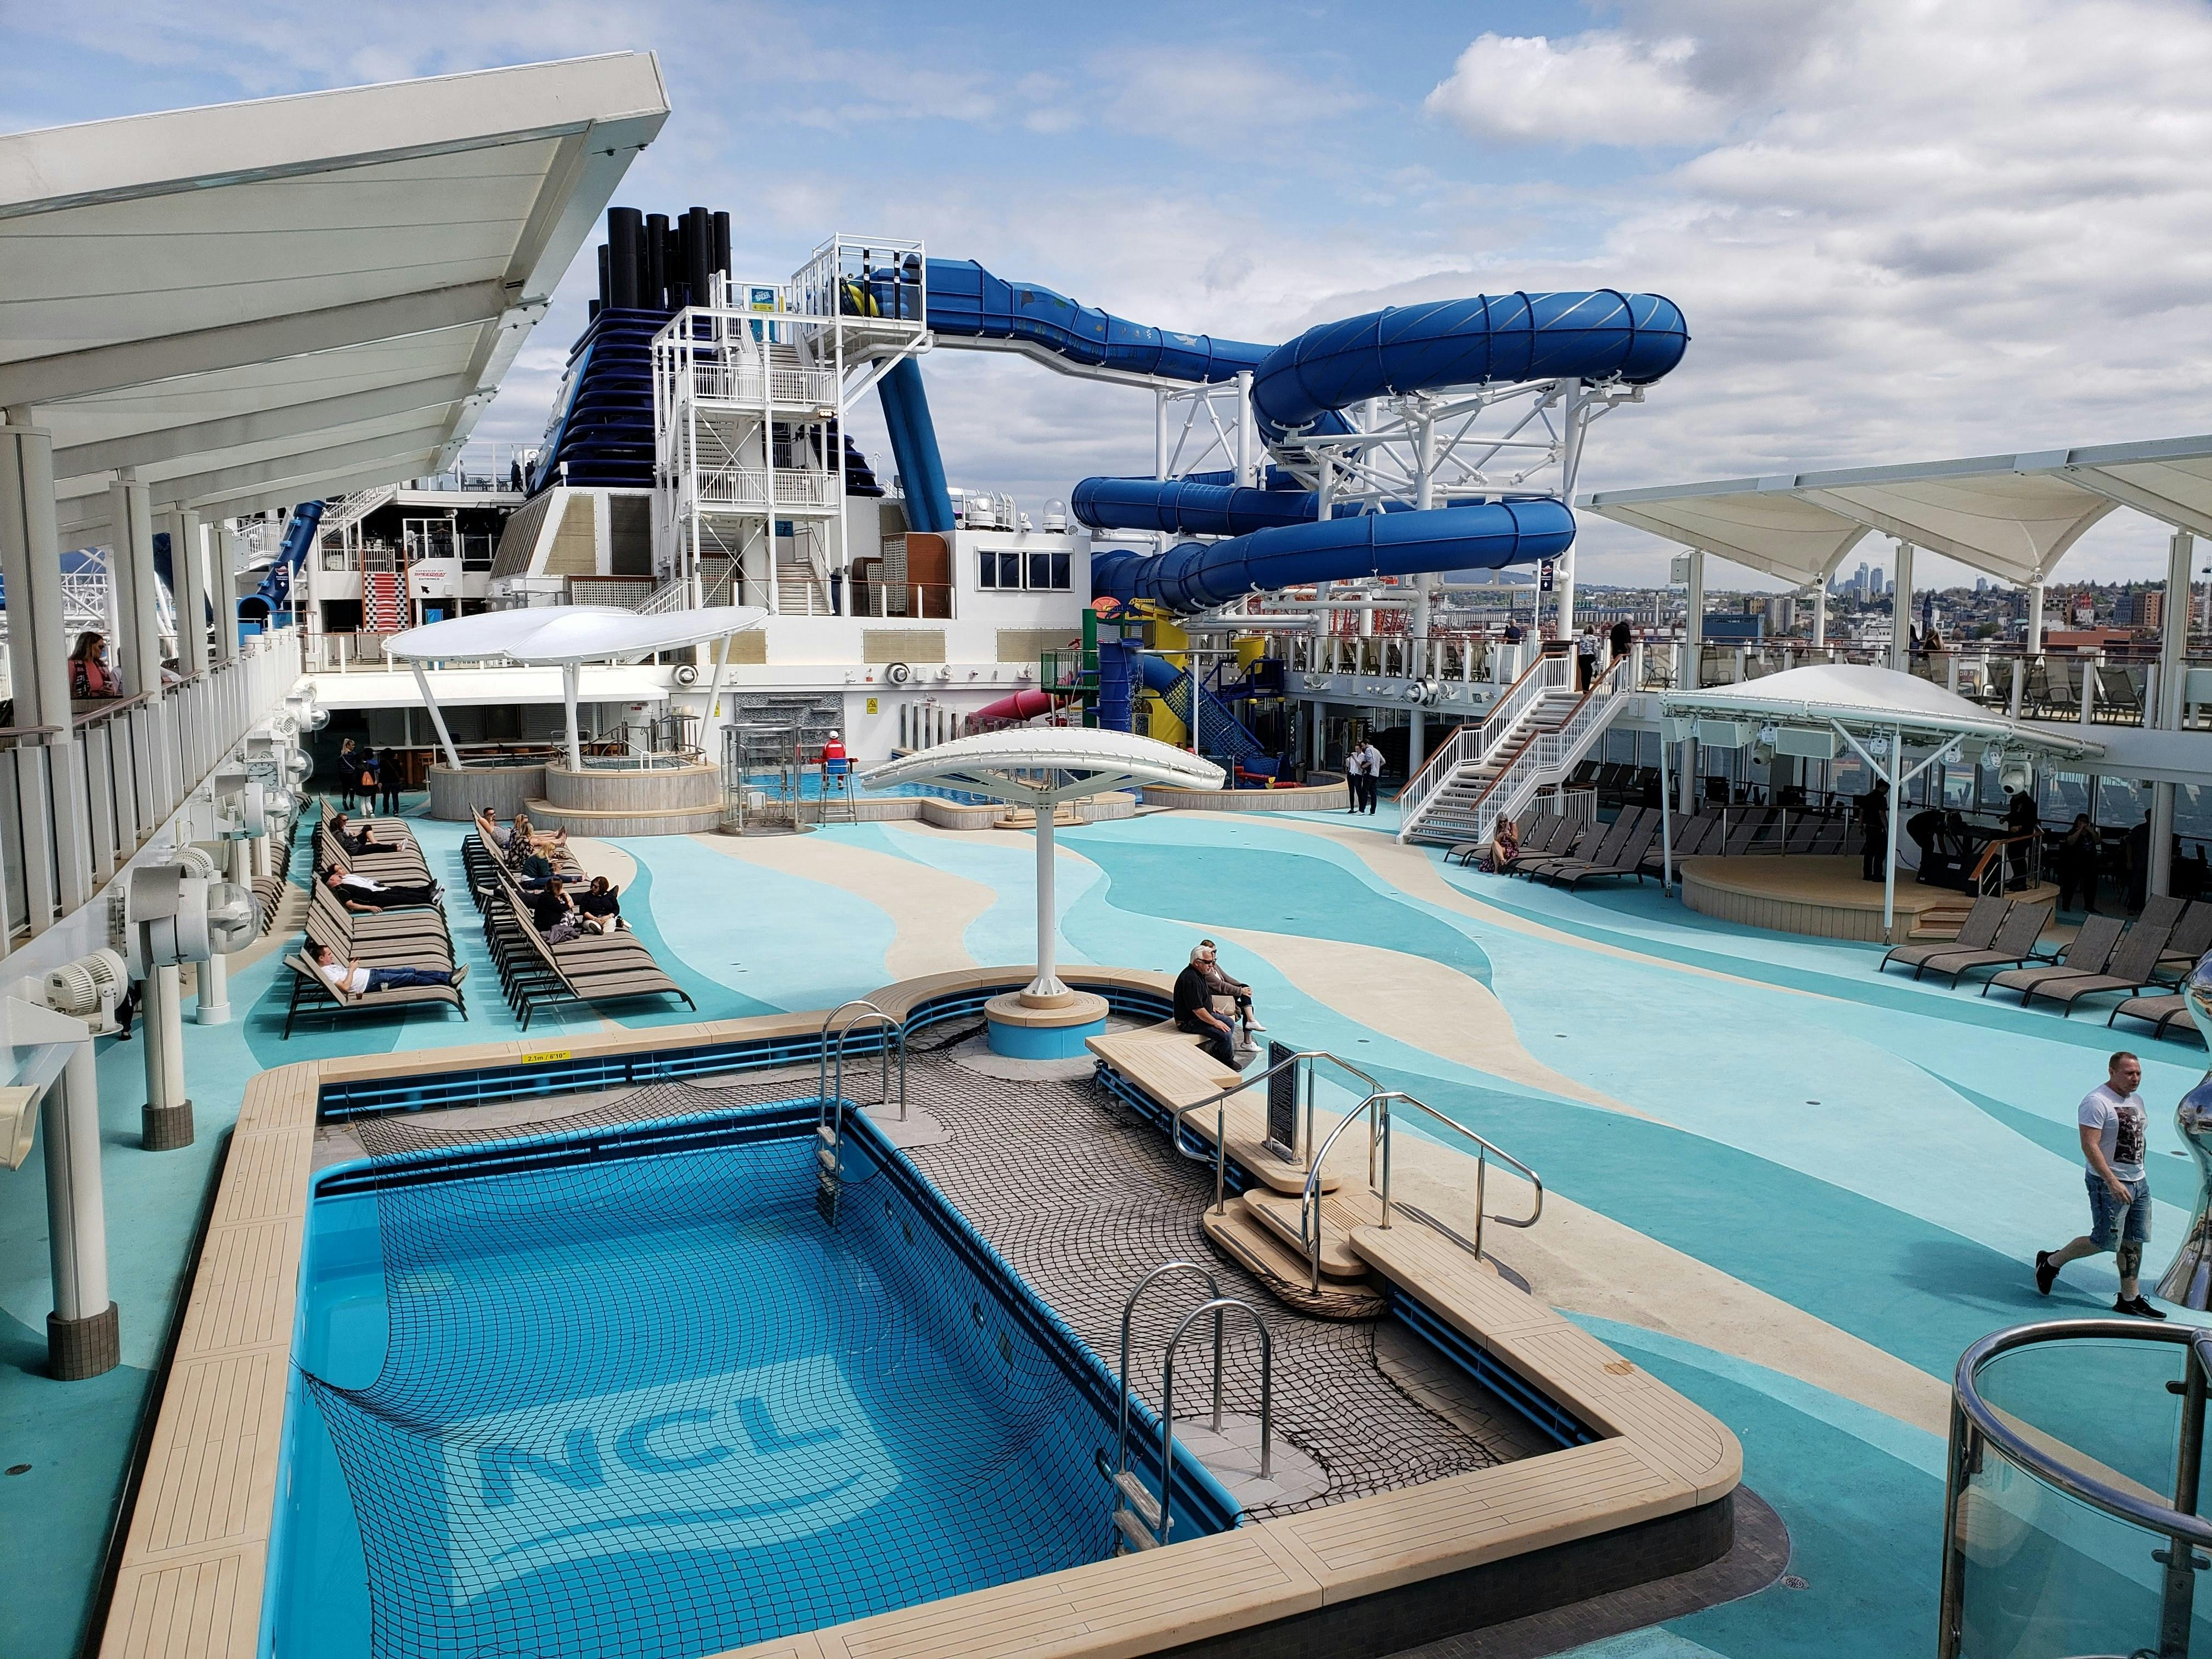 Norwegian Joy Cruise Review by SeaMichael April 26, 2019